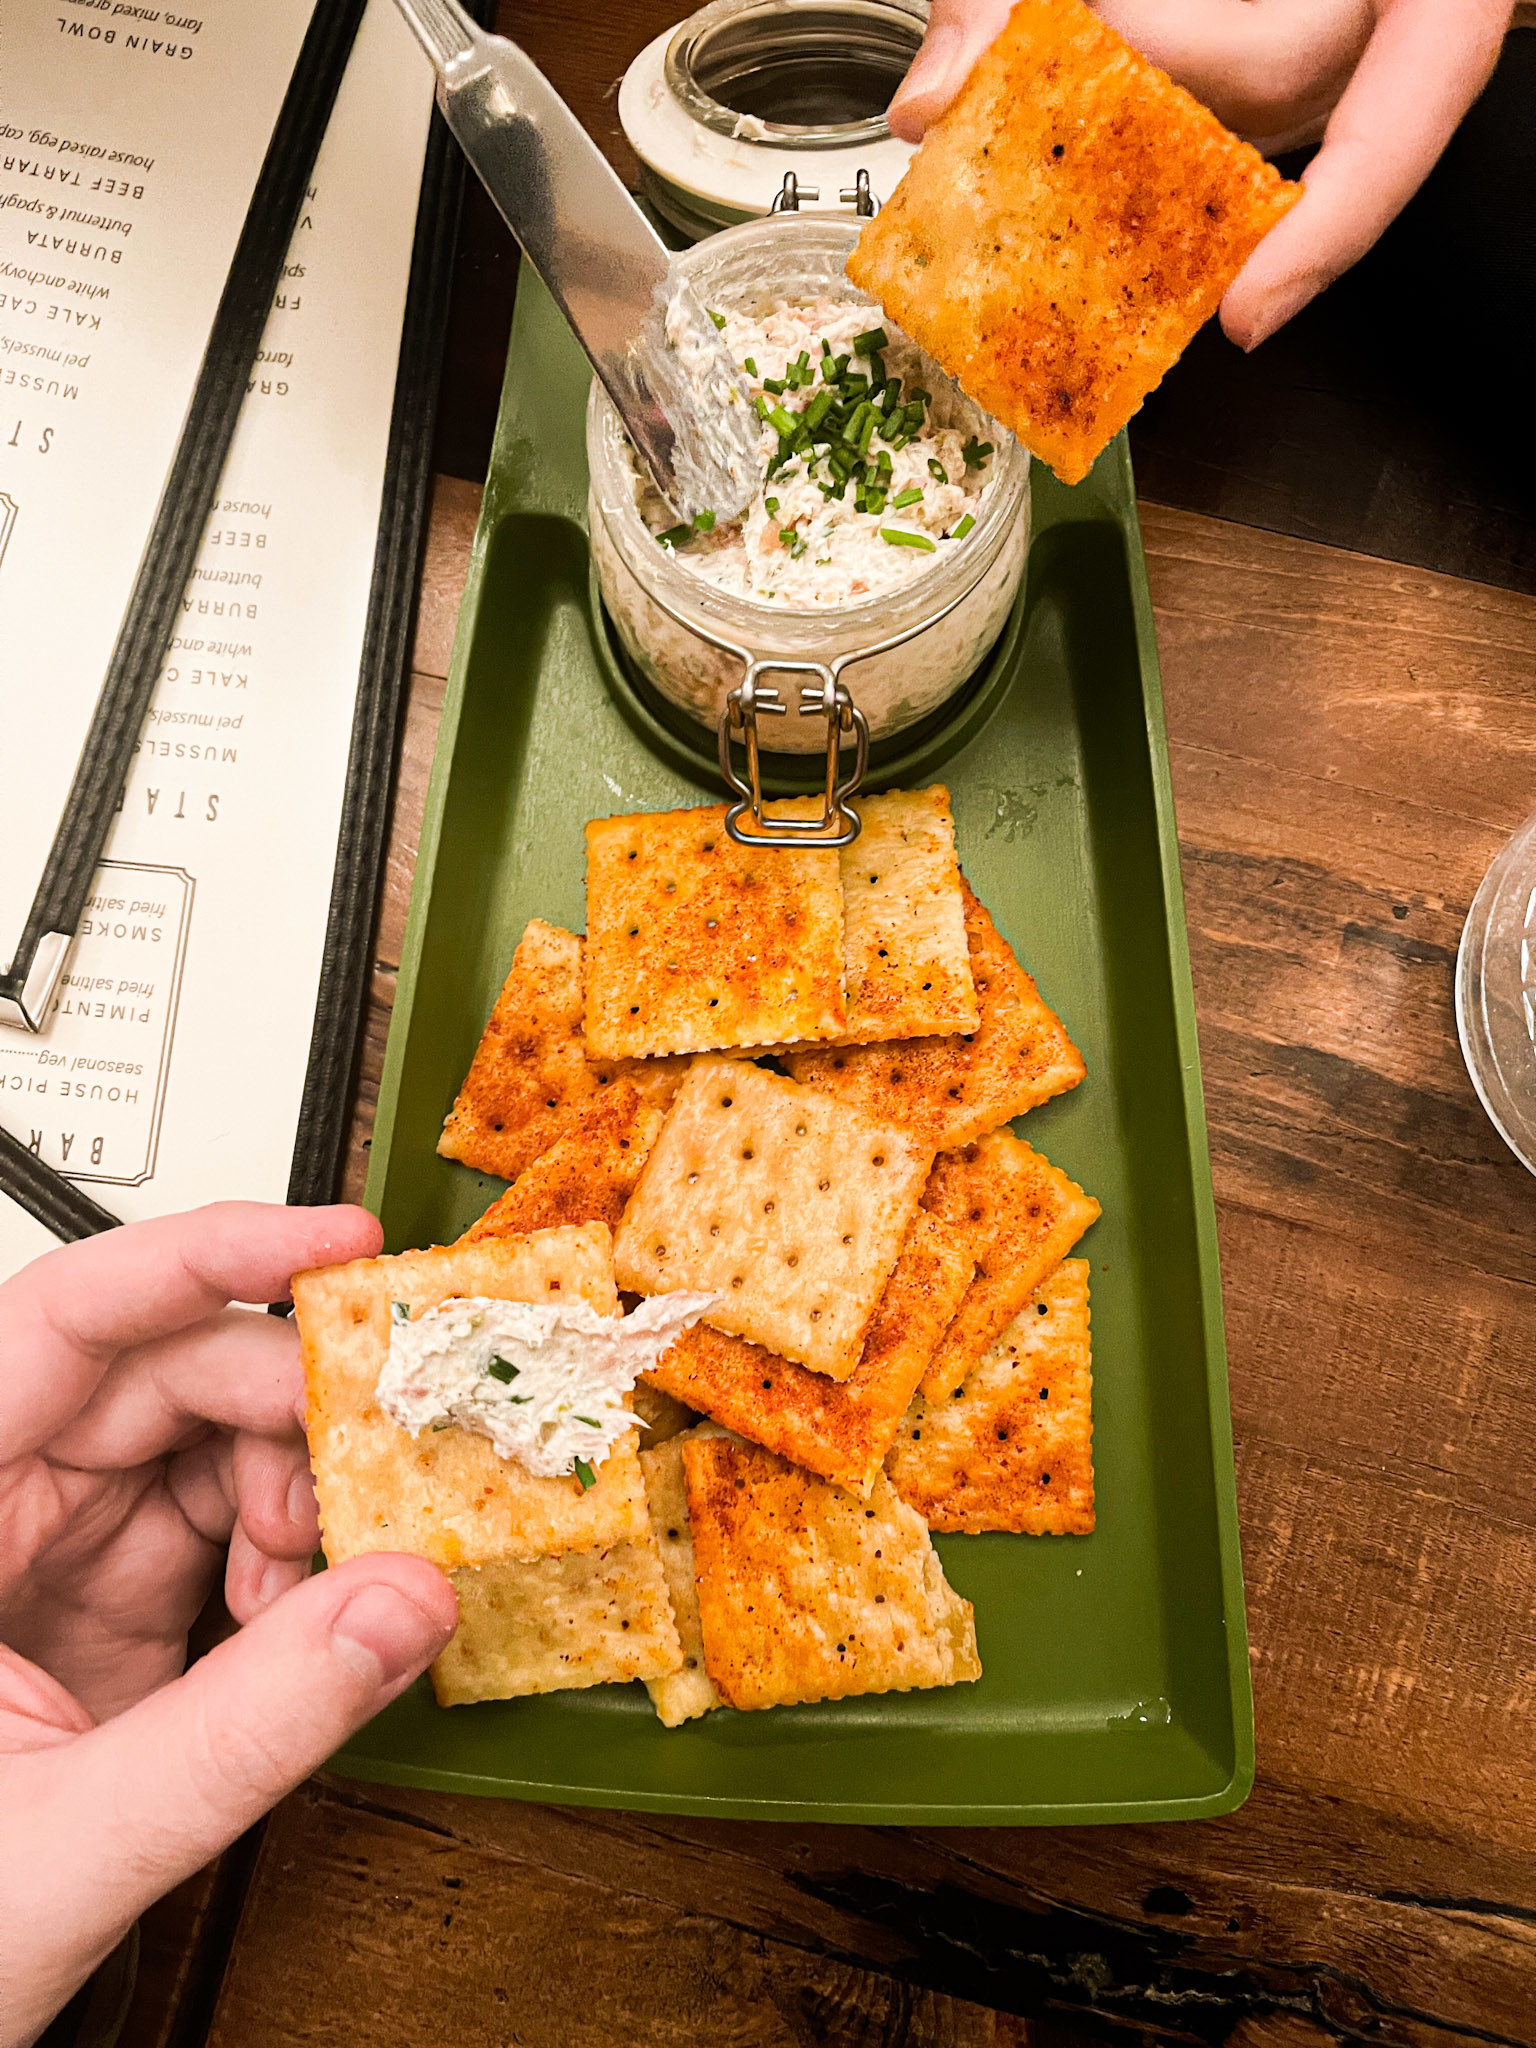 Person putting a spread on fried saltines